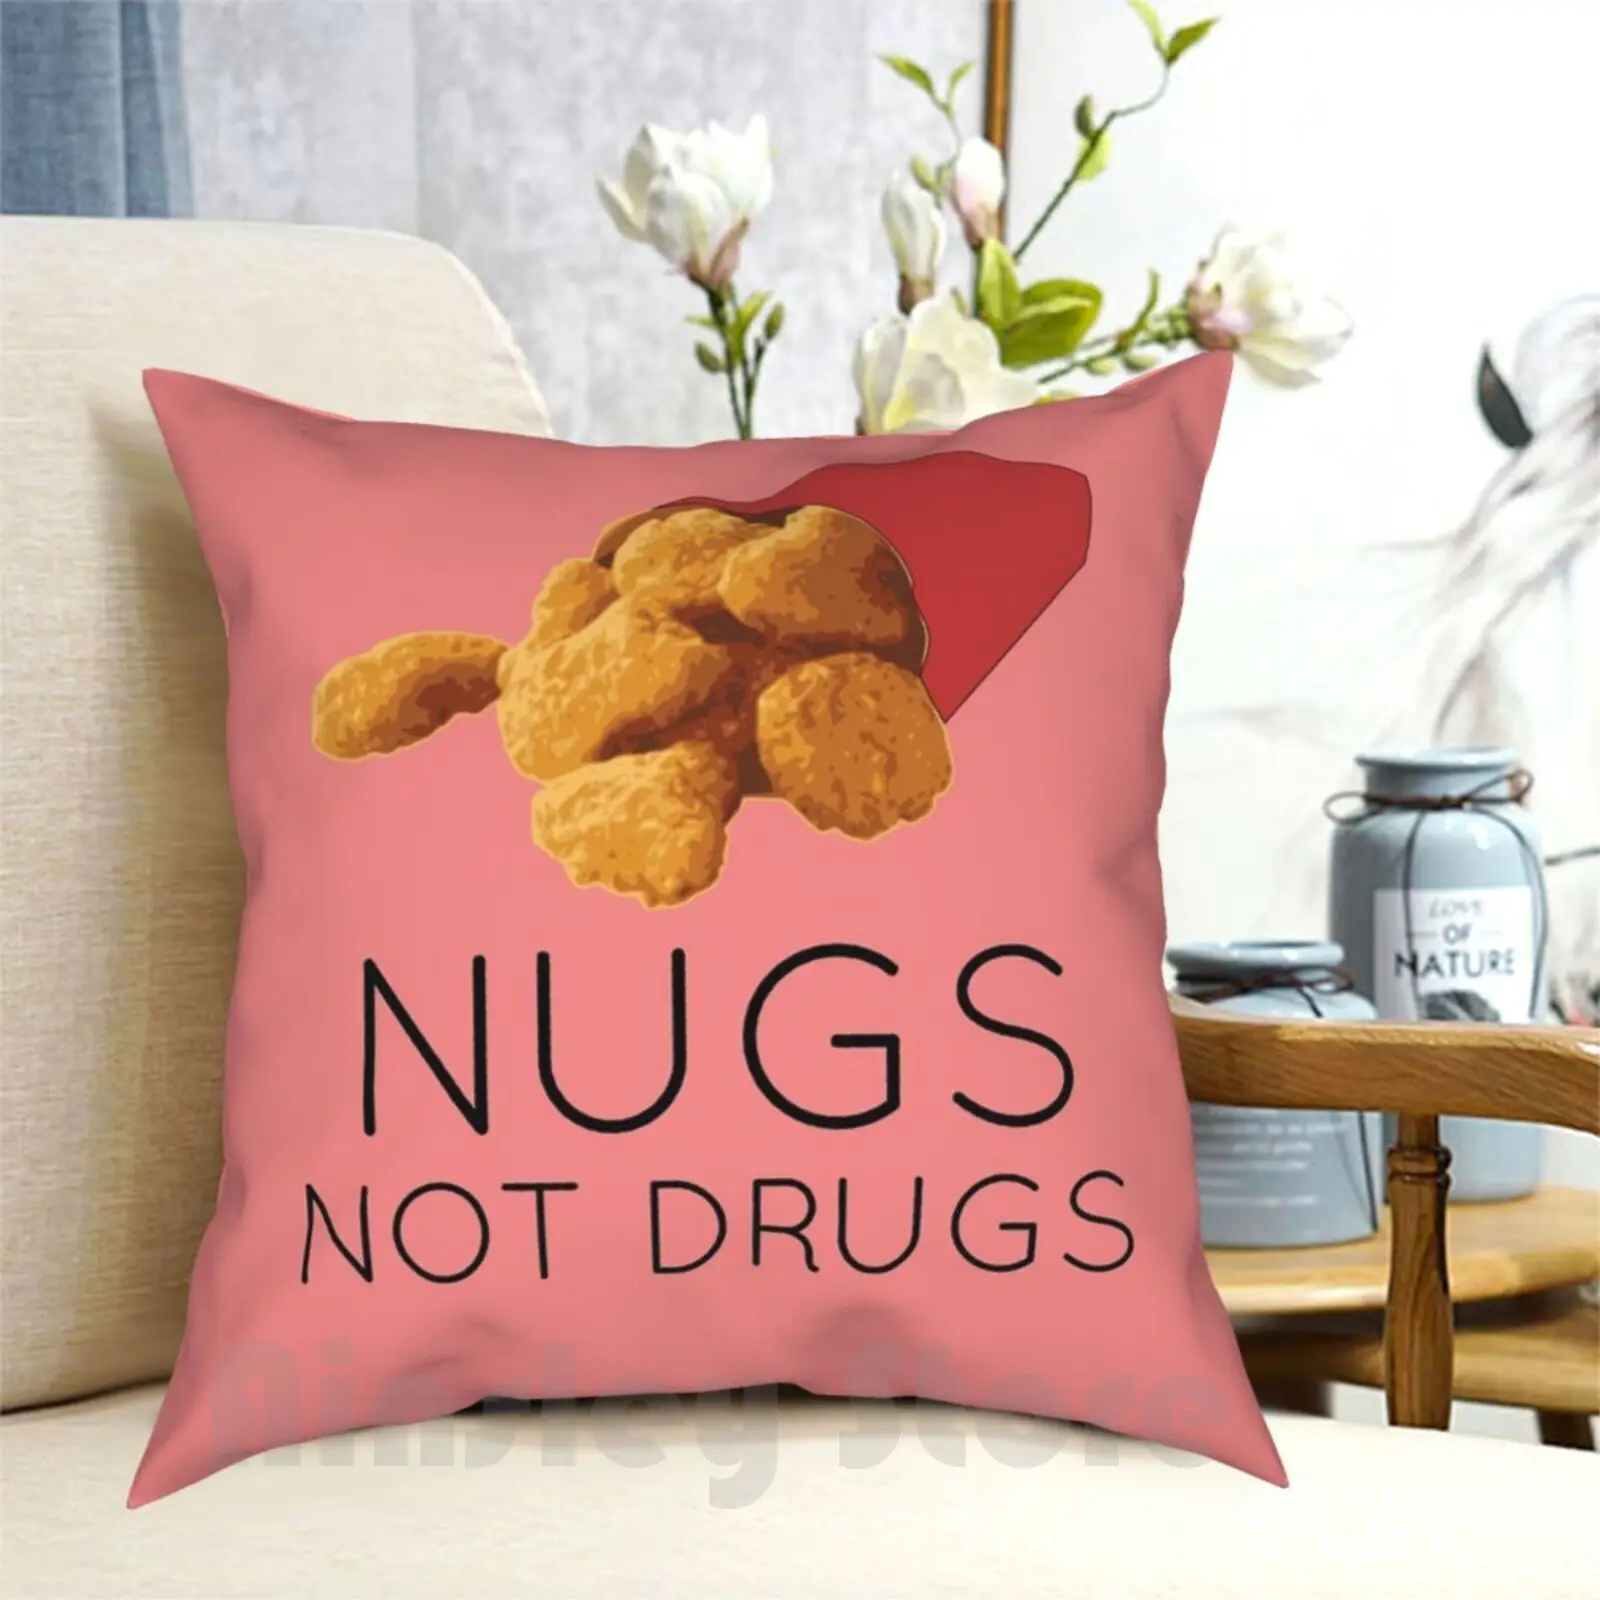 

Nugs Not Drugs Pillow Case Printed Home Soft DIY Pillow cover Positive Funny Cartoons Kids Shows Cool Negative Nerd Science